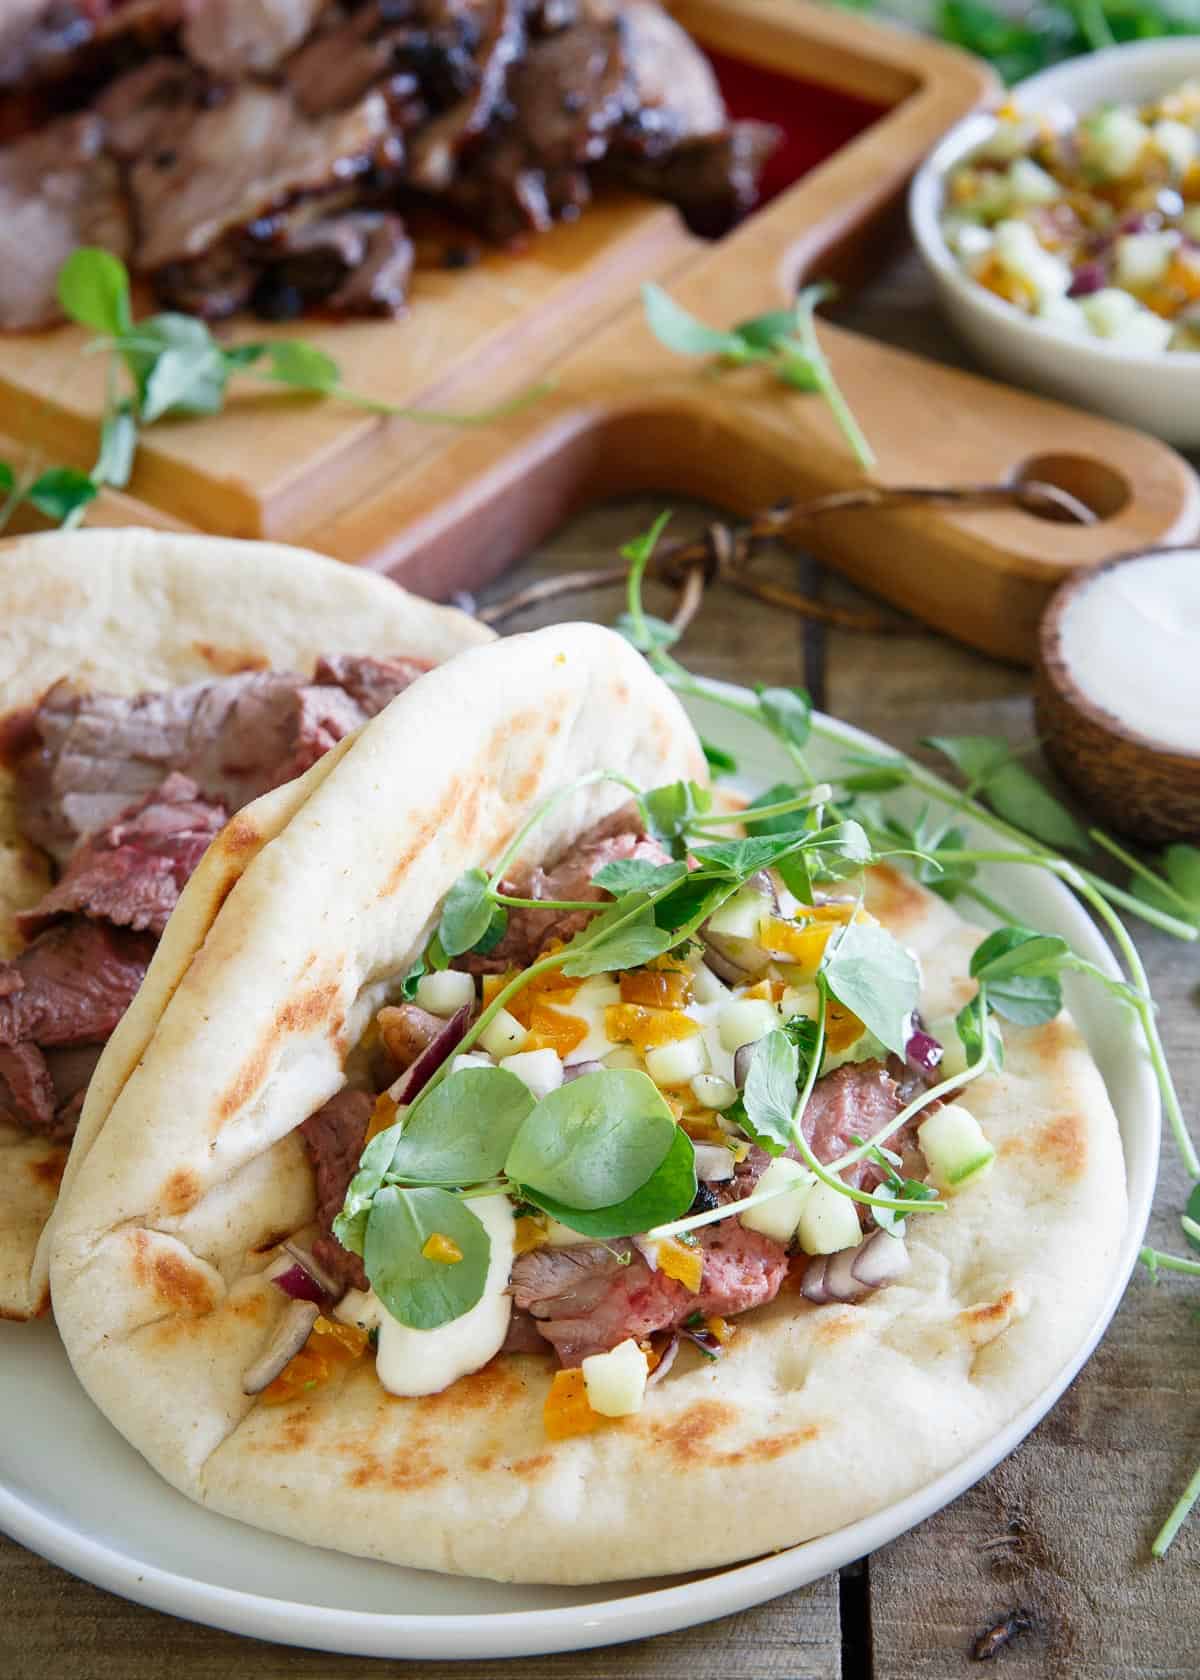 These spring gyros are topped with a sweet and refreshing apricot salsa, quick yogurt sauce and fresh pea sprouts. They're definitely not your average gyro!